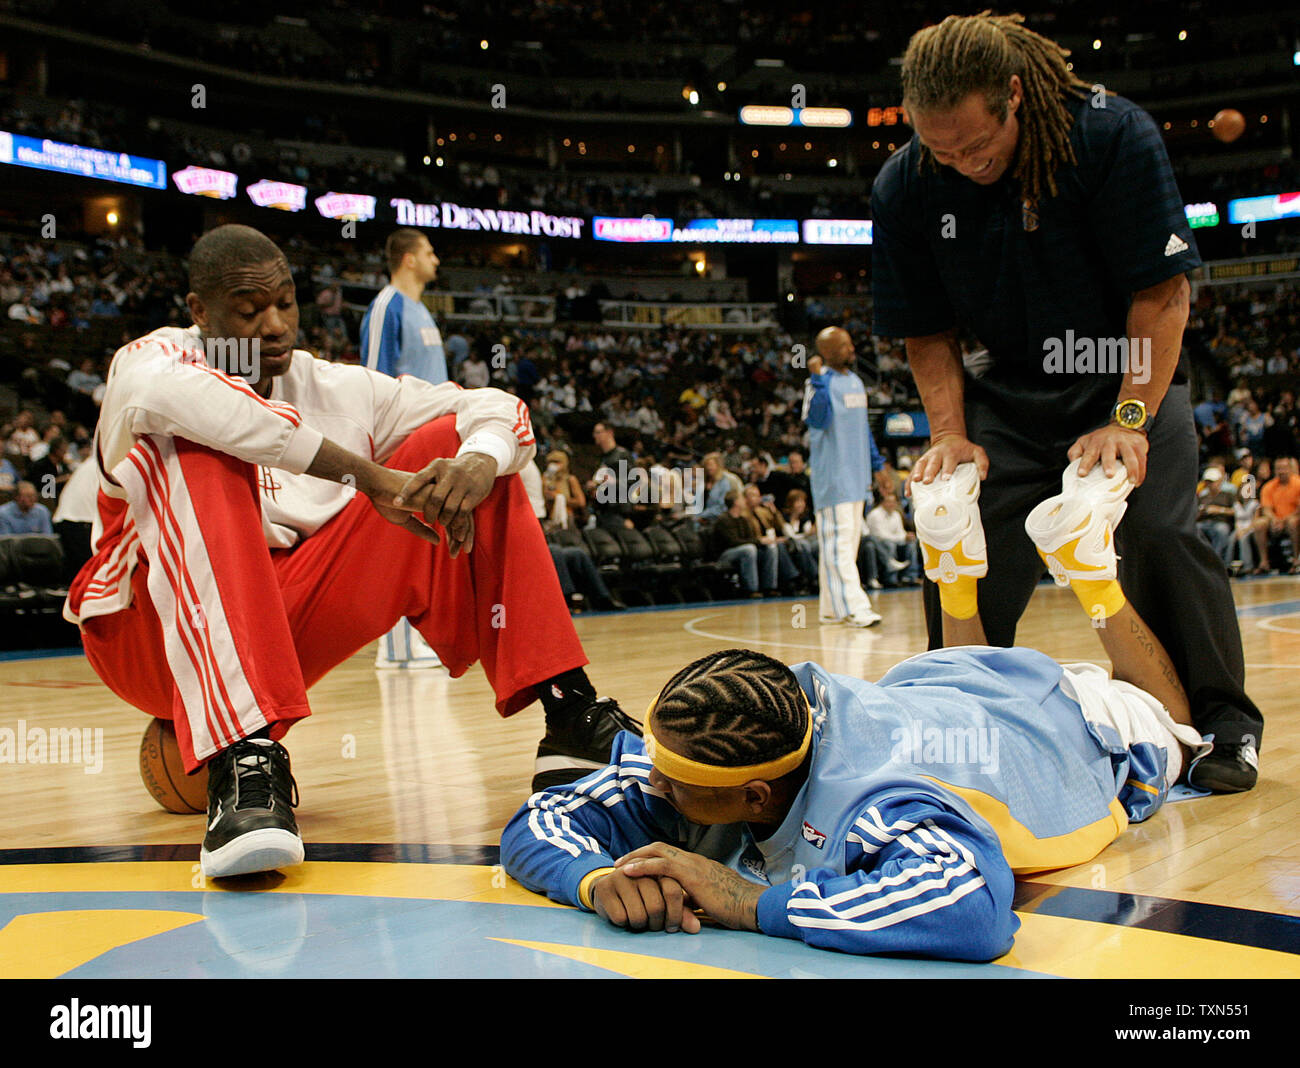 Houston Rockets center Dikembe Mutombo (L) sits on a basketball chatting with Denver Nuggets guard Allen Iverson during pre-game warm ups at the Pepsi Center in Denver on April 13, 2008.  Denver kept its playoff hopes alive with a 111-94 win over Houston.   (UPI Photo/Gary C. Caskey) Stock Photo